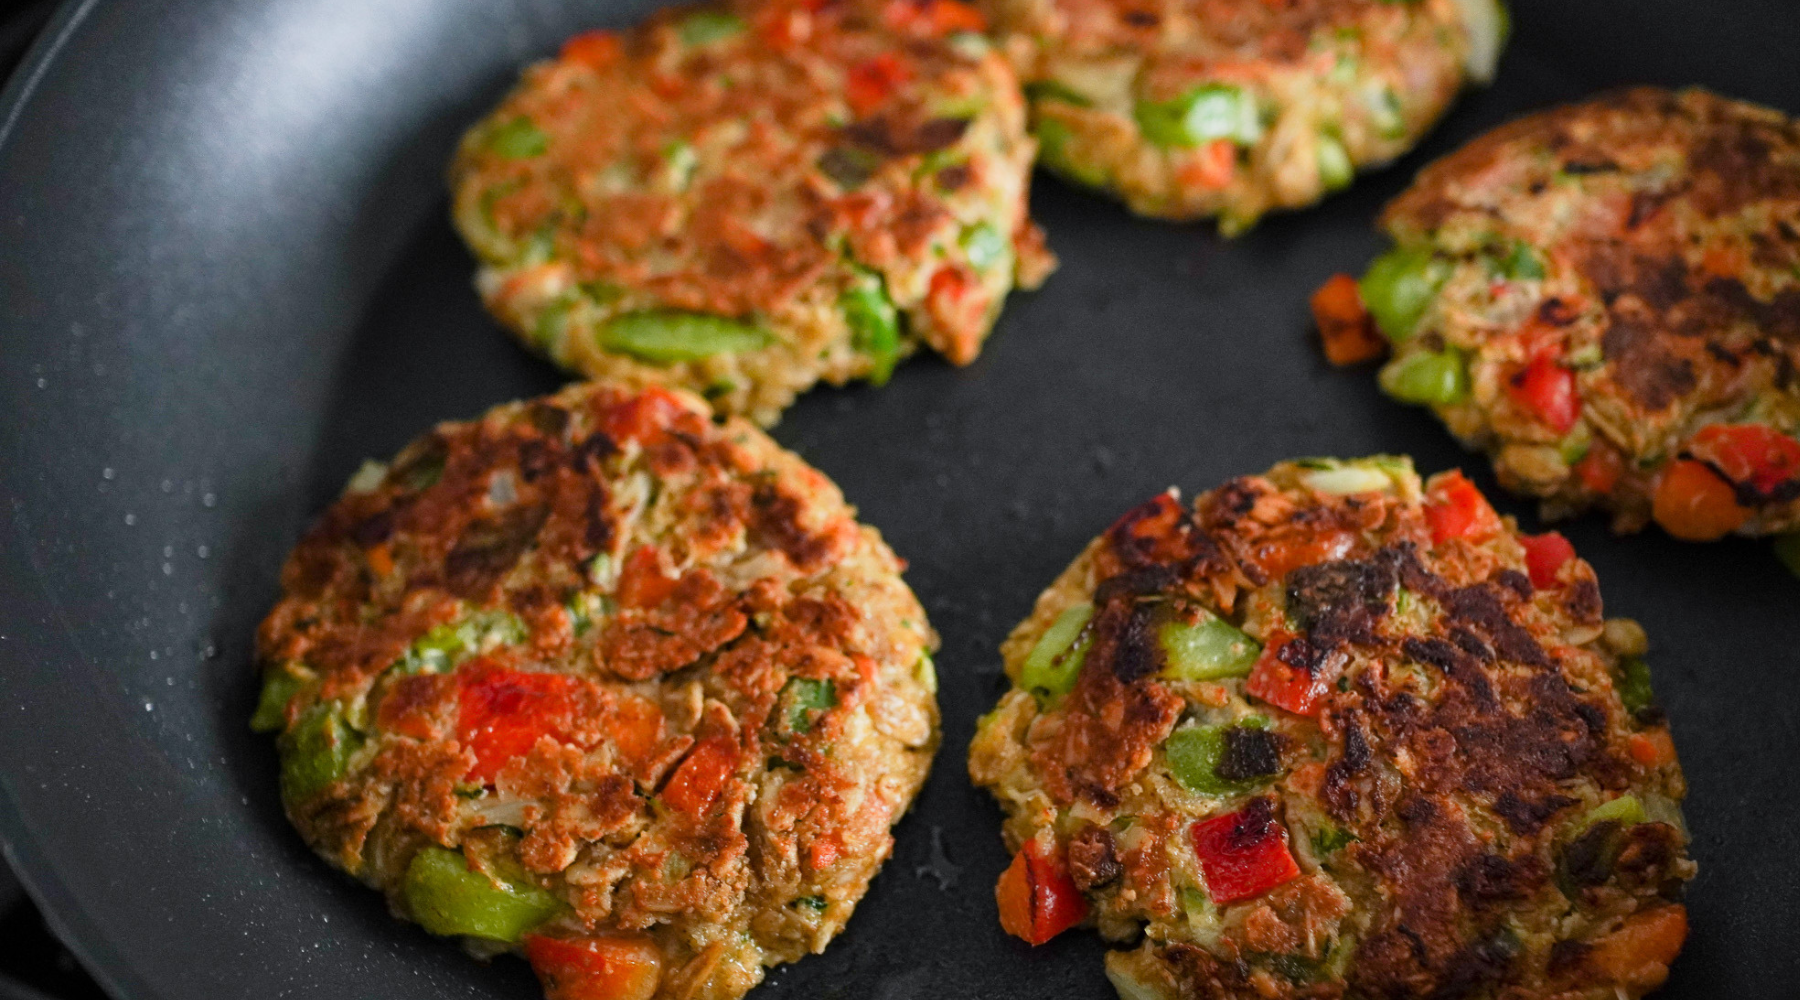 Nut And Seed Oat Patties With A Delicious Pesto